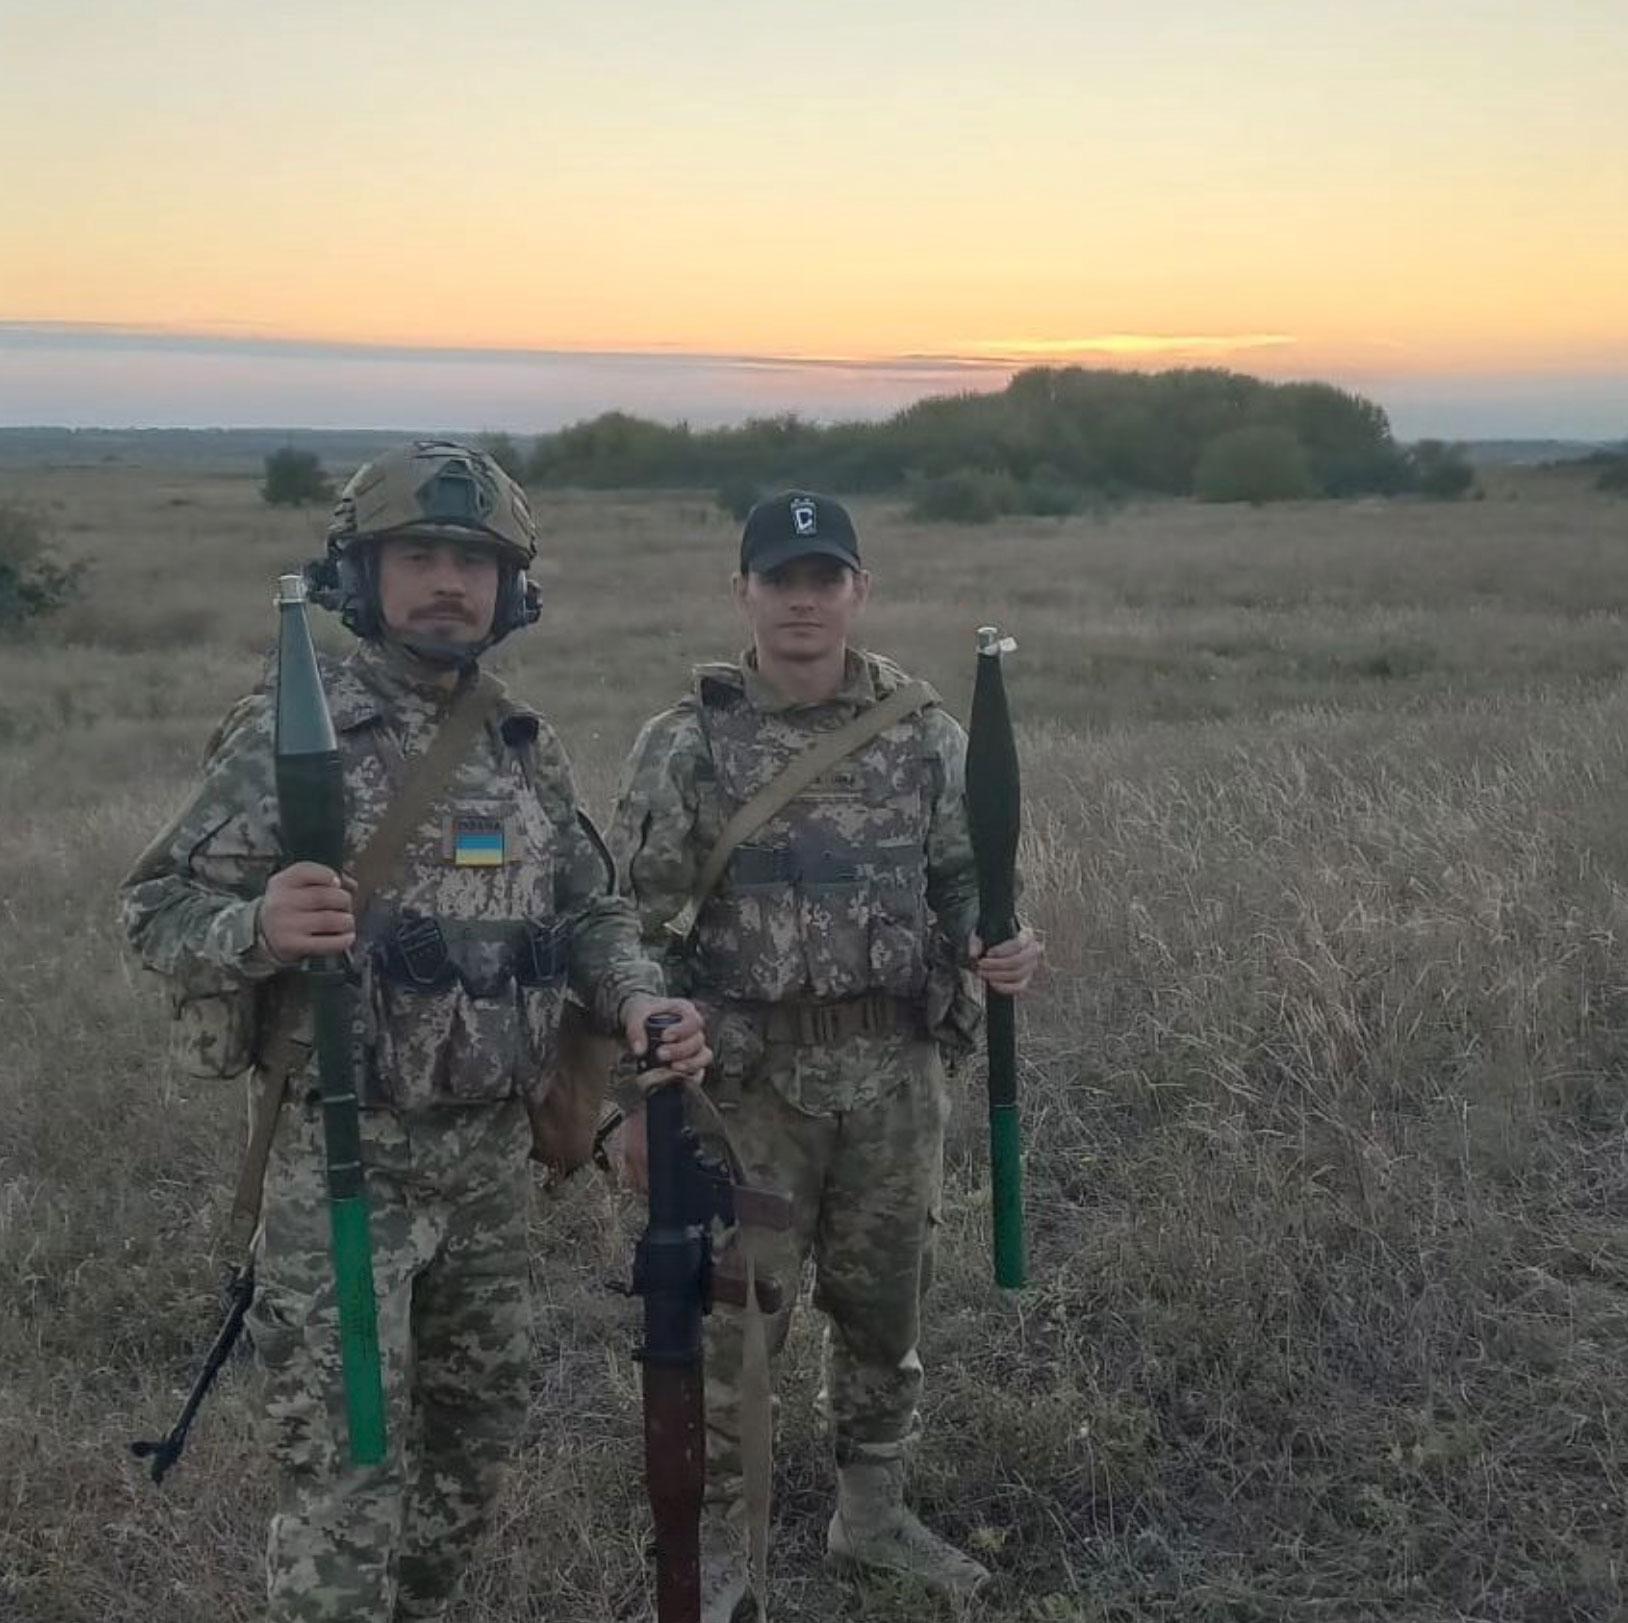 Colombian veteran Oscar Arley Triana (left) joined Ukraine’s military last summer. He went missing in October, when his unit was ambushed near the city of Kupiansk.